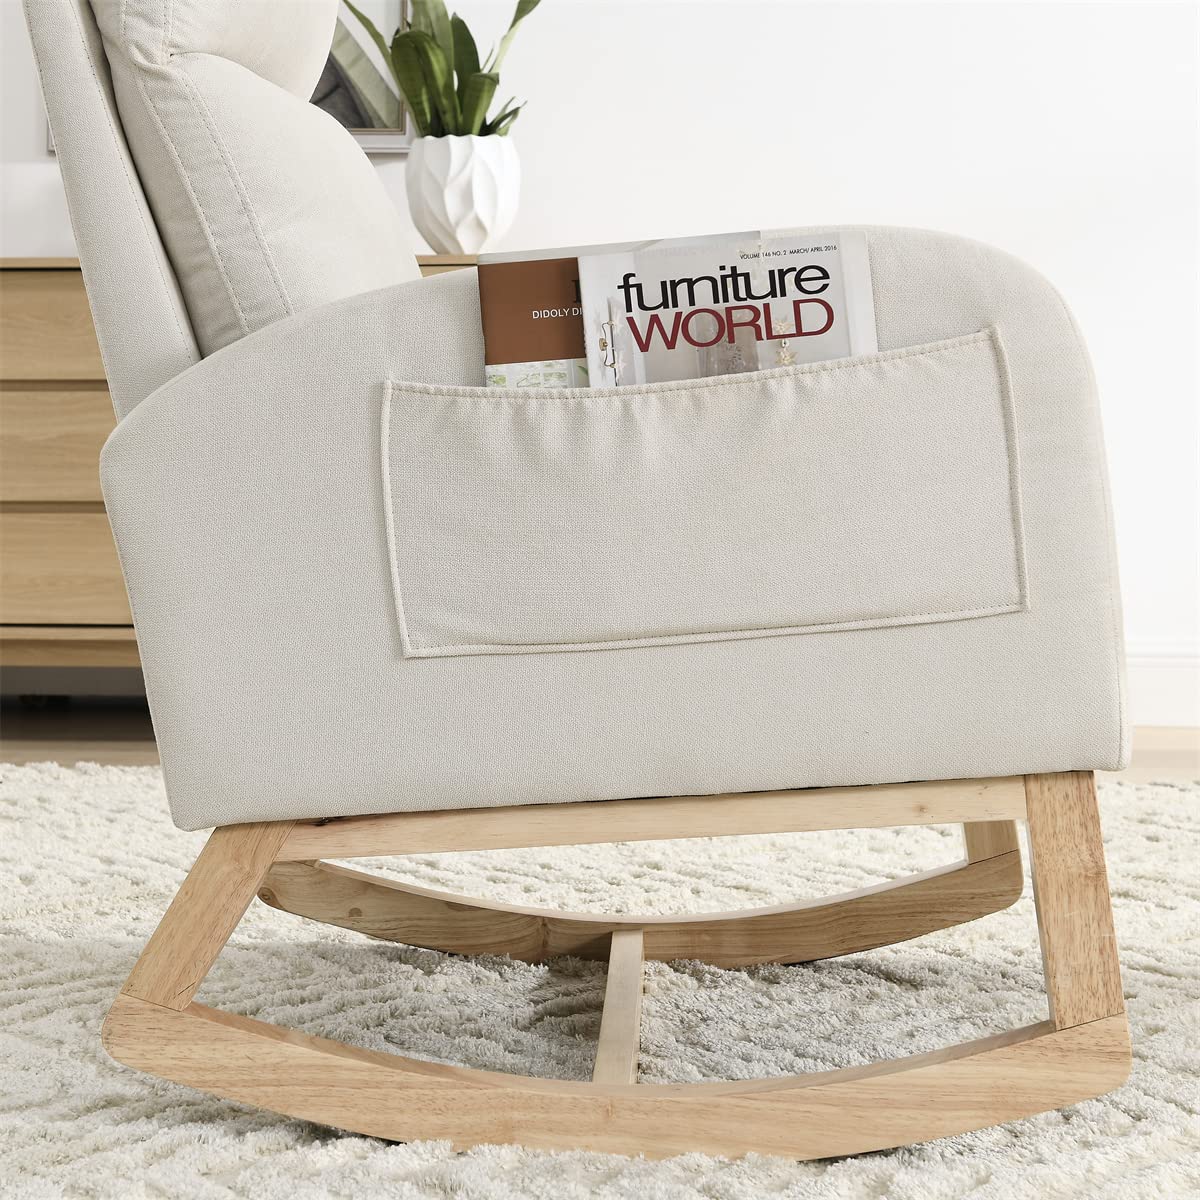 Fabric Rocking Chair Nursery Chair,Modern Upholstered High Back Glider Rocking Armchair,Comfy Rocker with Padded Seat and Wood Base,Two Side Pocket Accent Chair for Living Room Bedroom Office,Beige